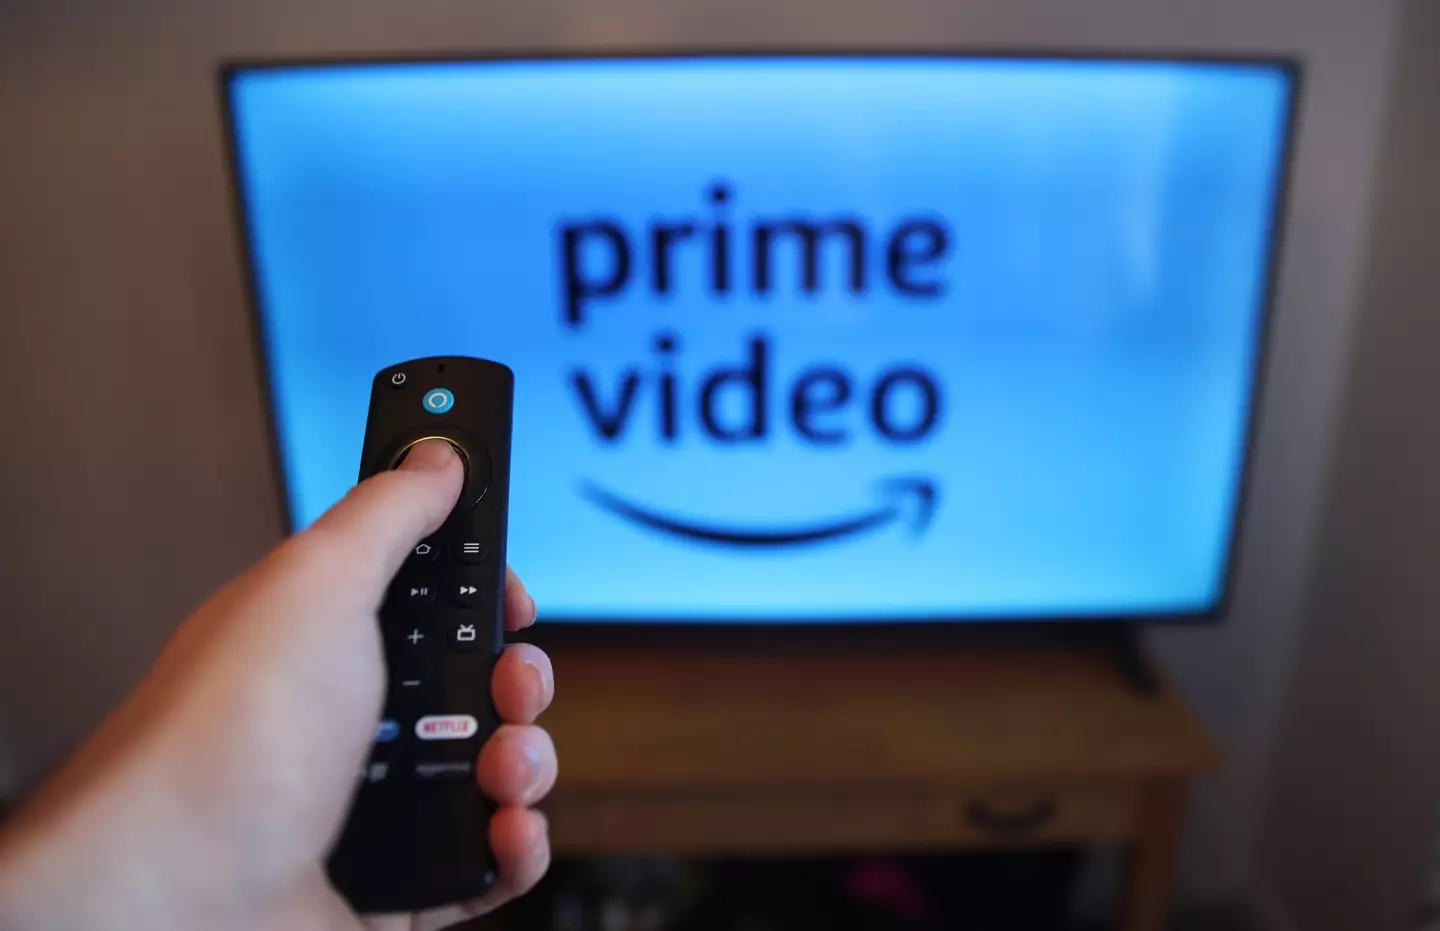 Amazon Fire Sticks are often hacked for illegal streaming means.